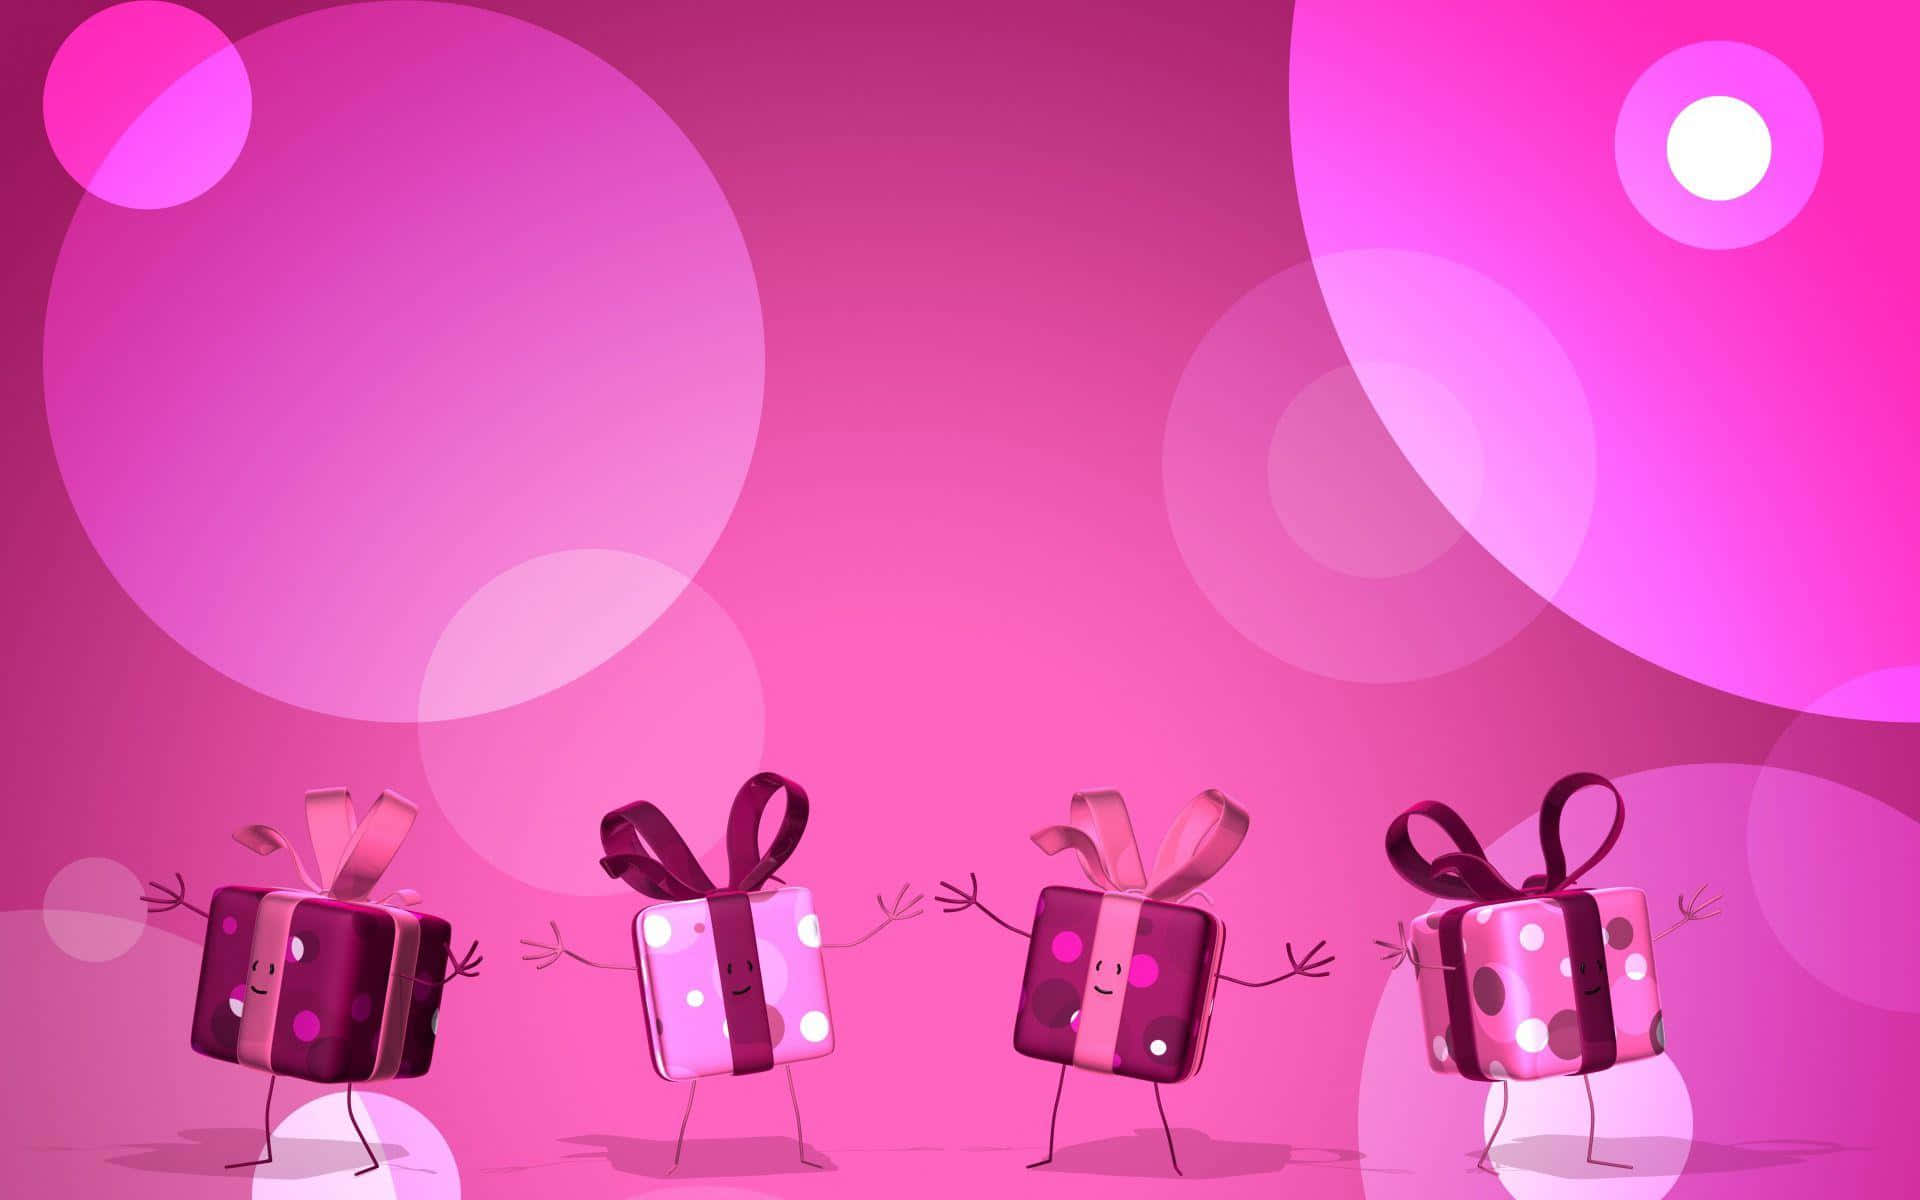 Three People Holding Presents On A Pink Background Wallpaper